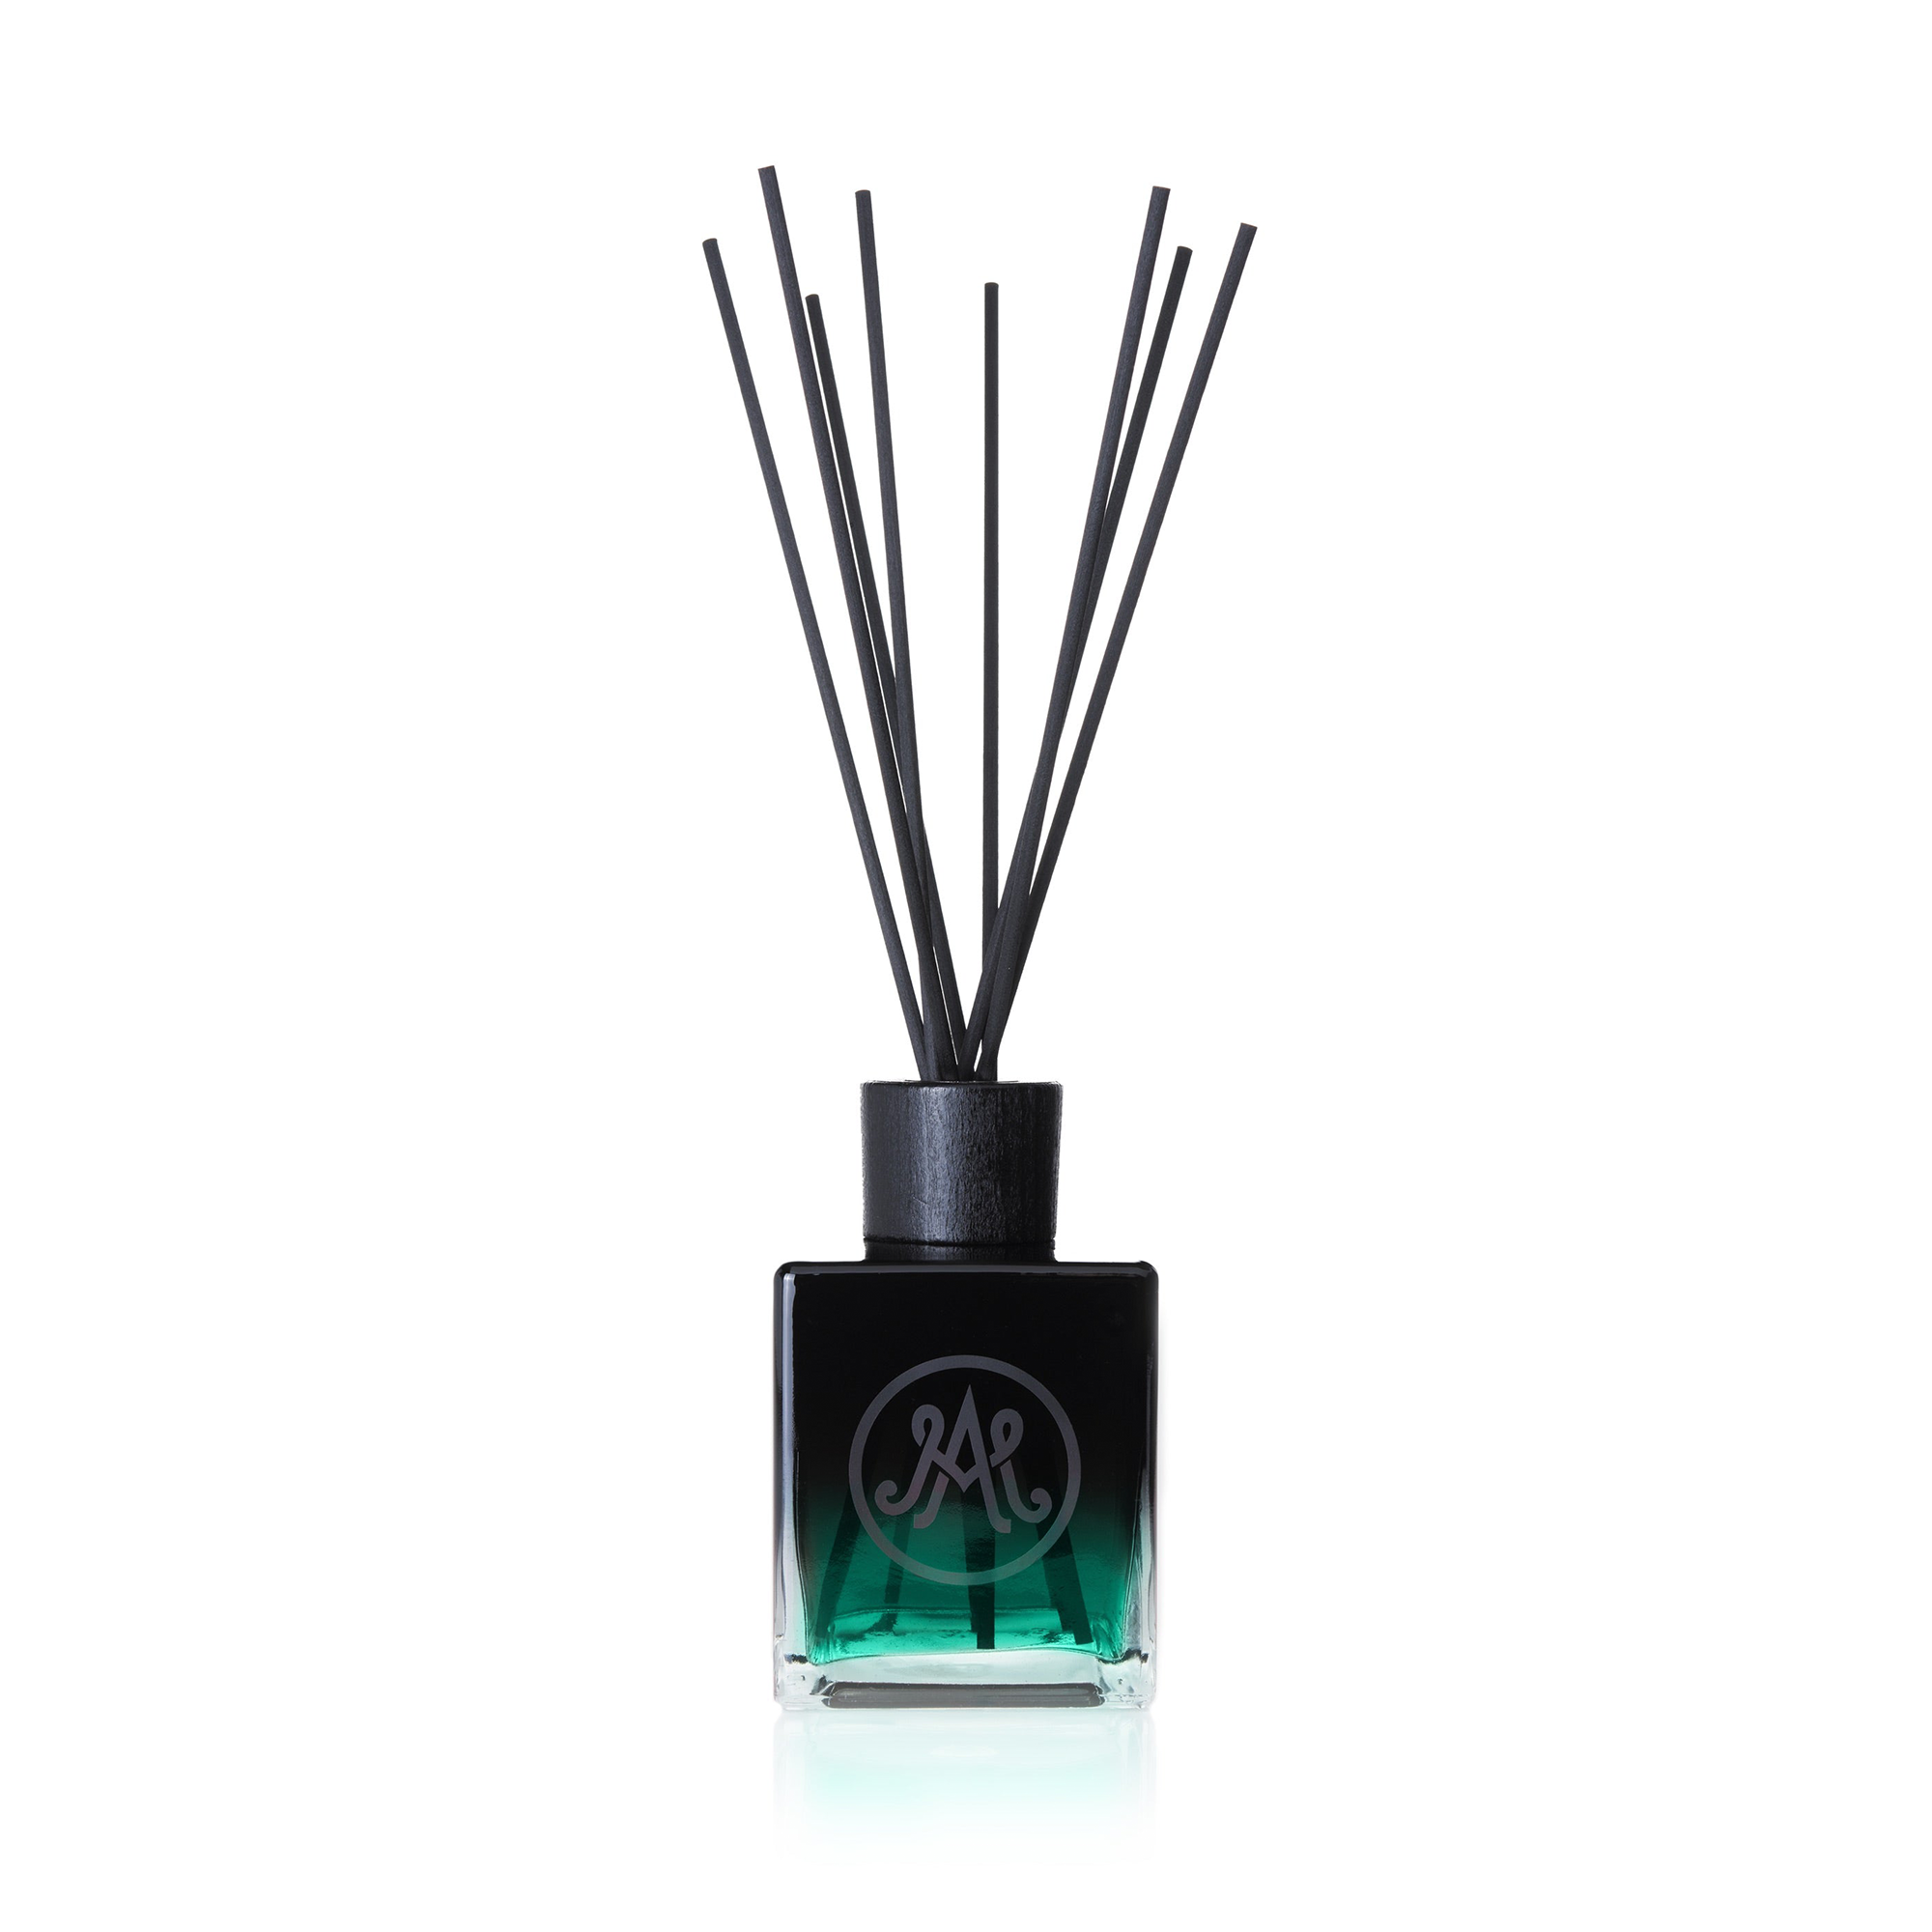 A dark green diffuser with black reeds is displayed, featuring a sleek black cap and an elegant monogram logo on the front of the bottle. A drop of 20-year-old Armagnac, with its woody, velvet aroma, adds a hint of warmth, is creating a deep, smoky, and woody scent.